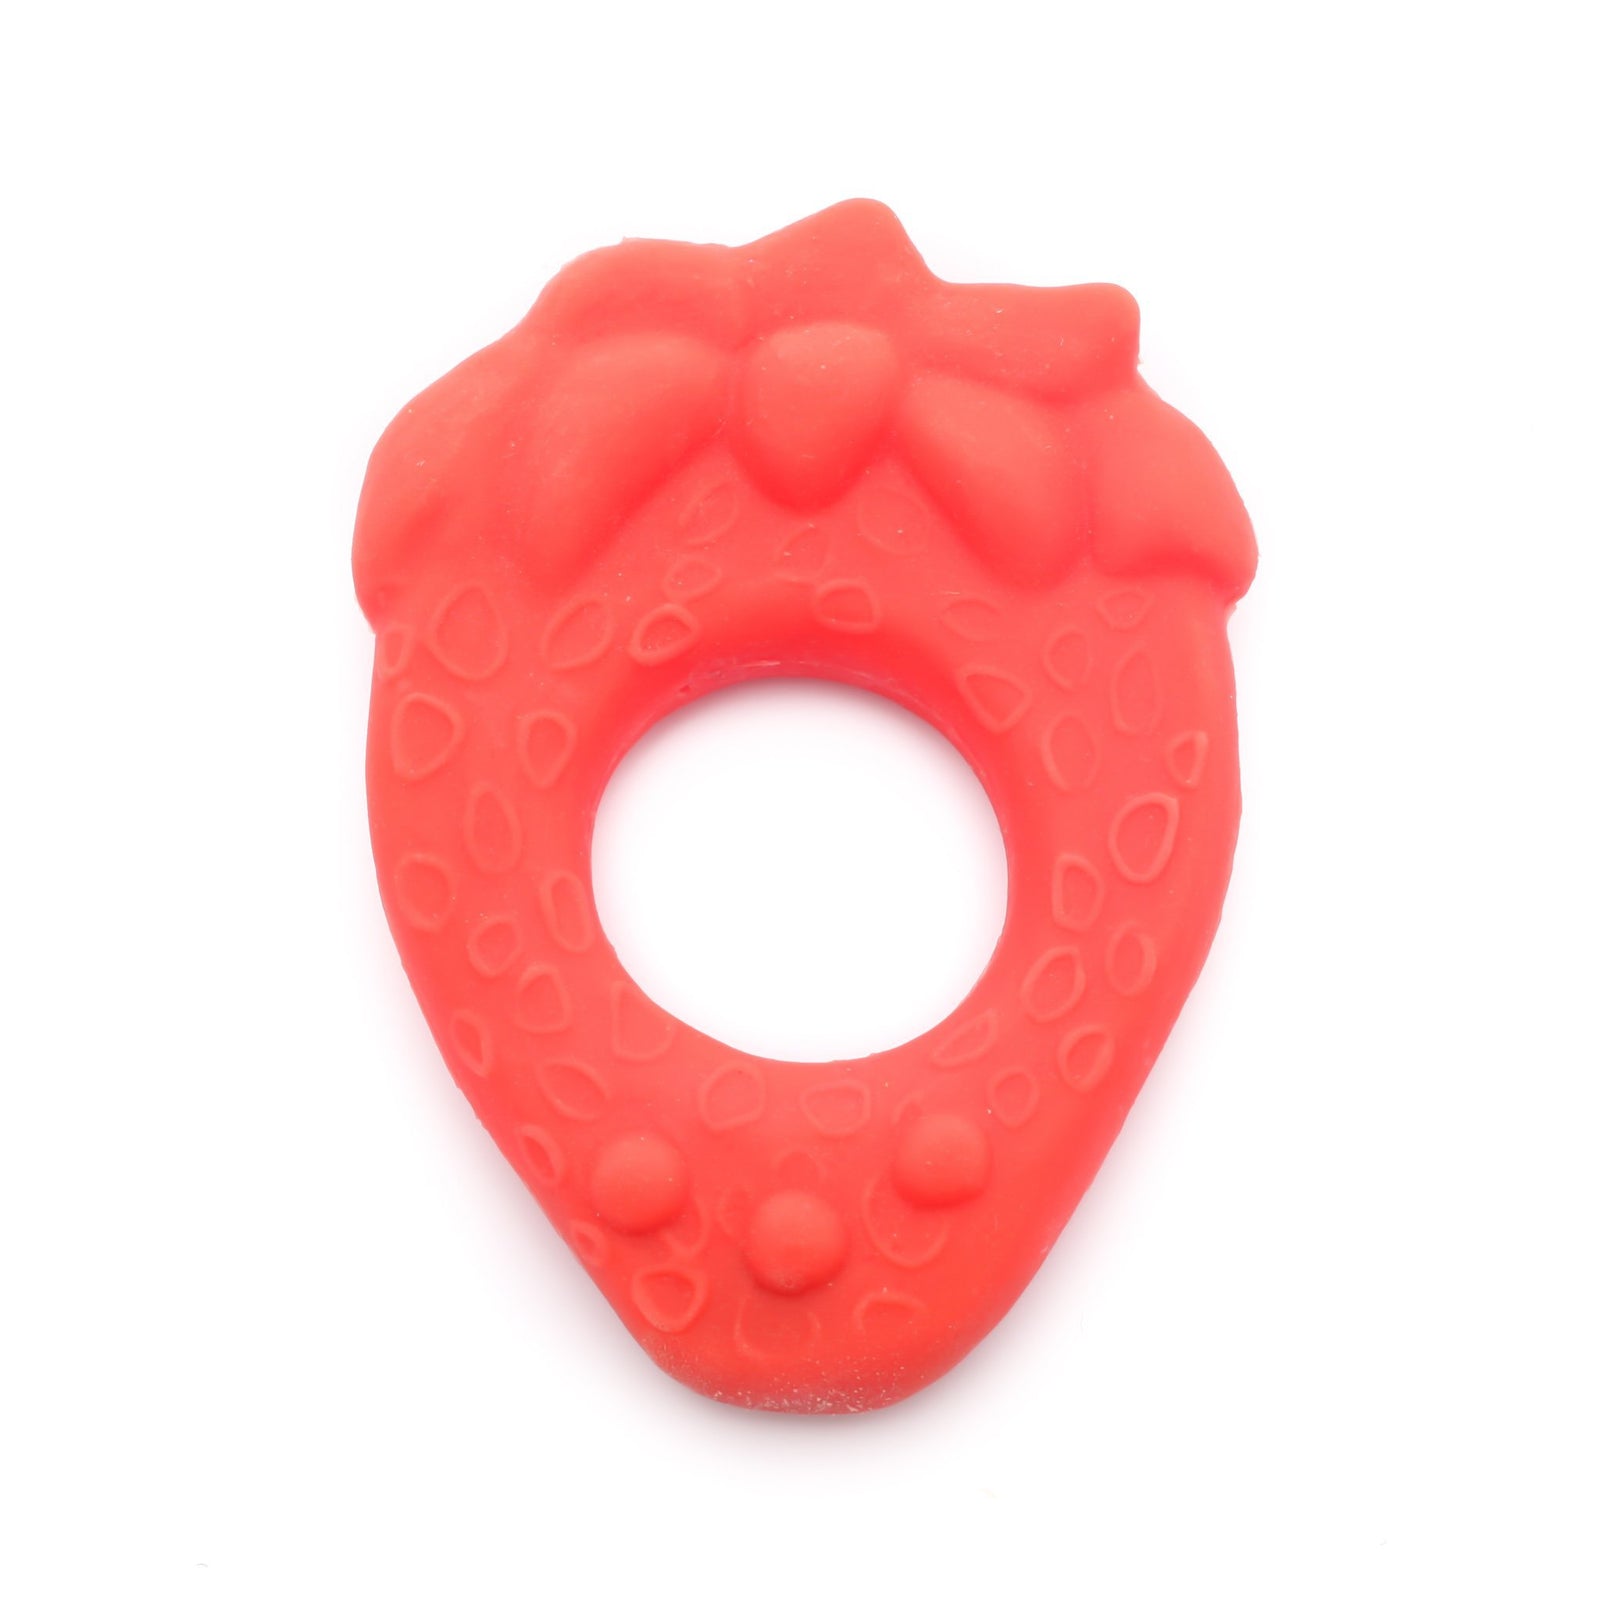 Natural Rubber Teether - Ecopiggy Shop - Rubber Teething Toy